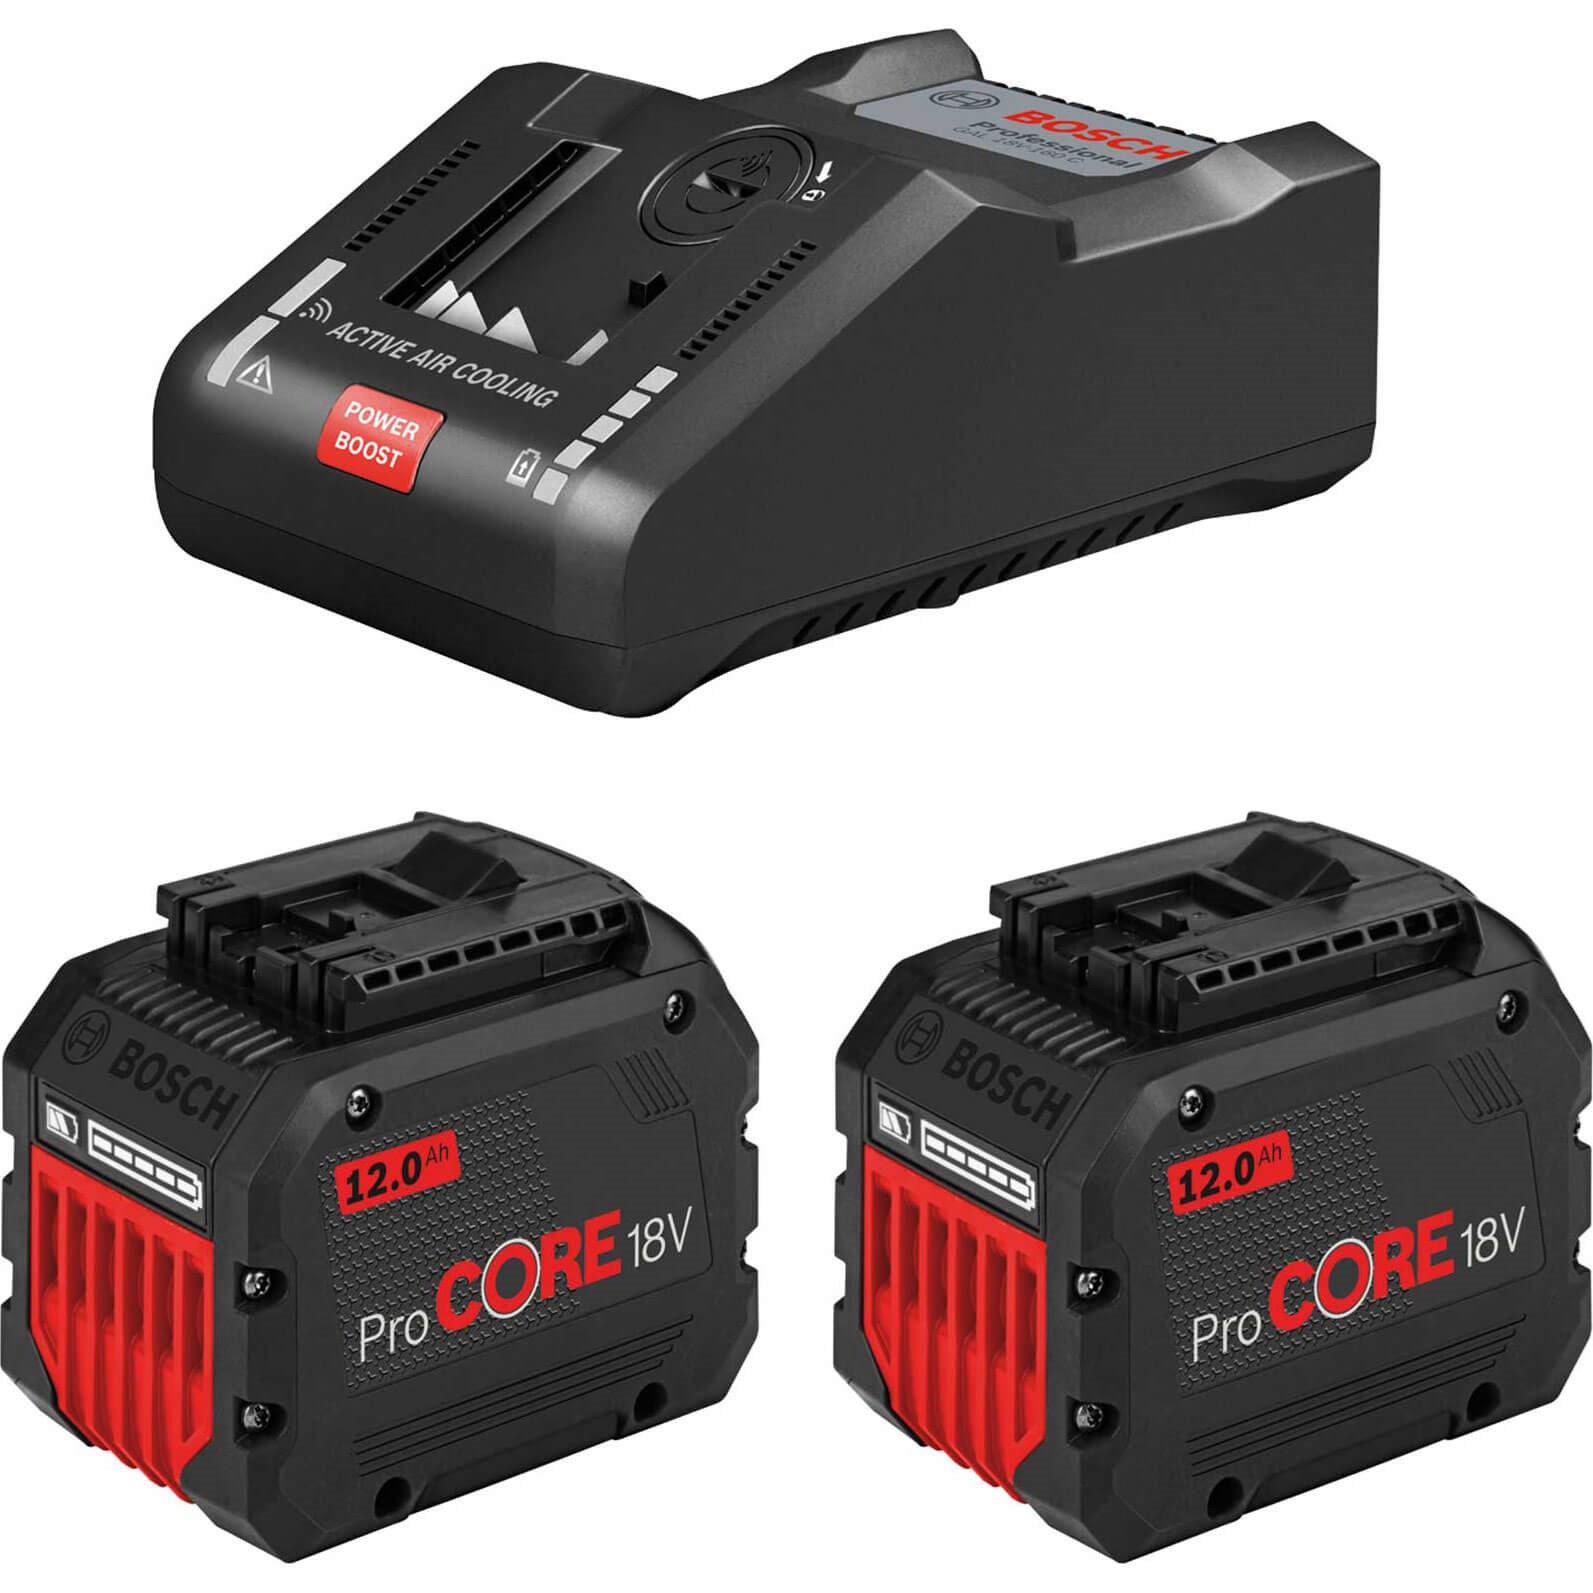 Bosch Genuine BLUE 18v Cordless ProCORE Li-ion Battery 12ah and Charger